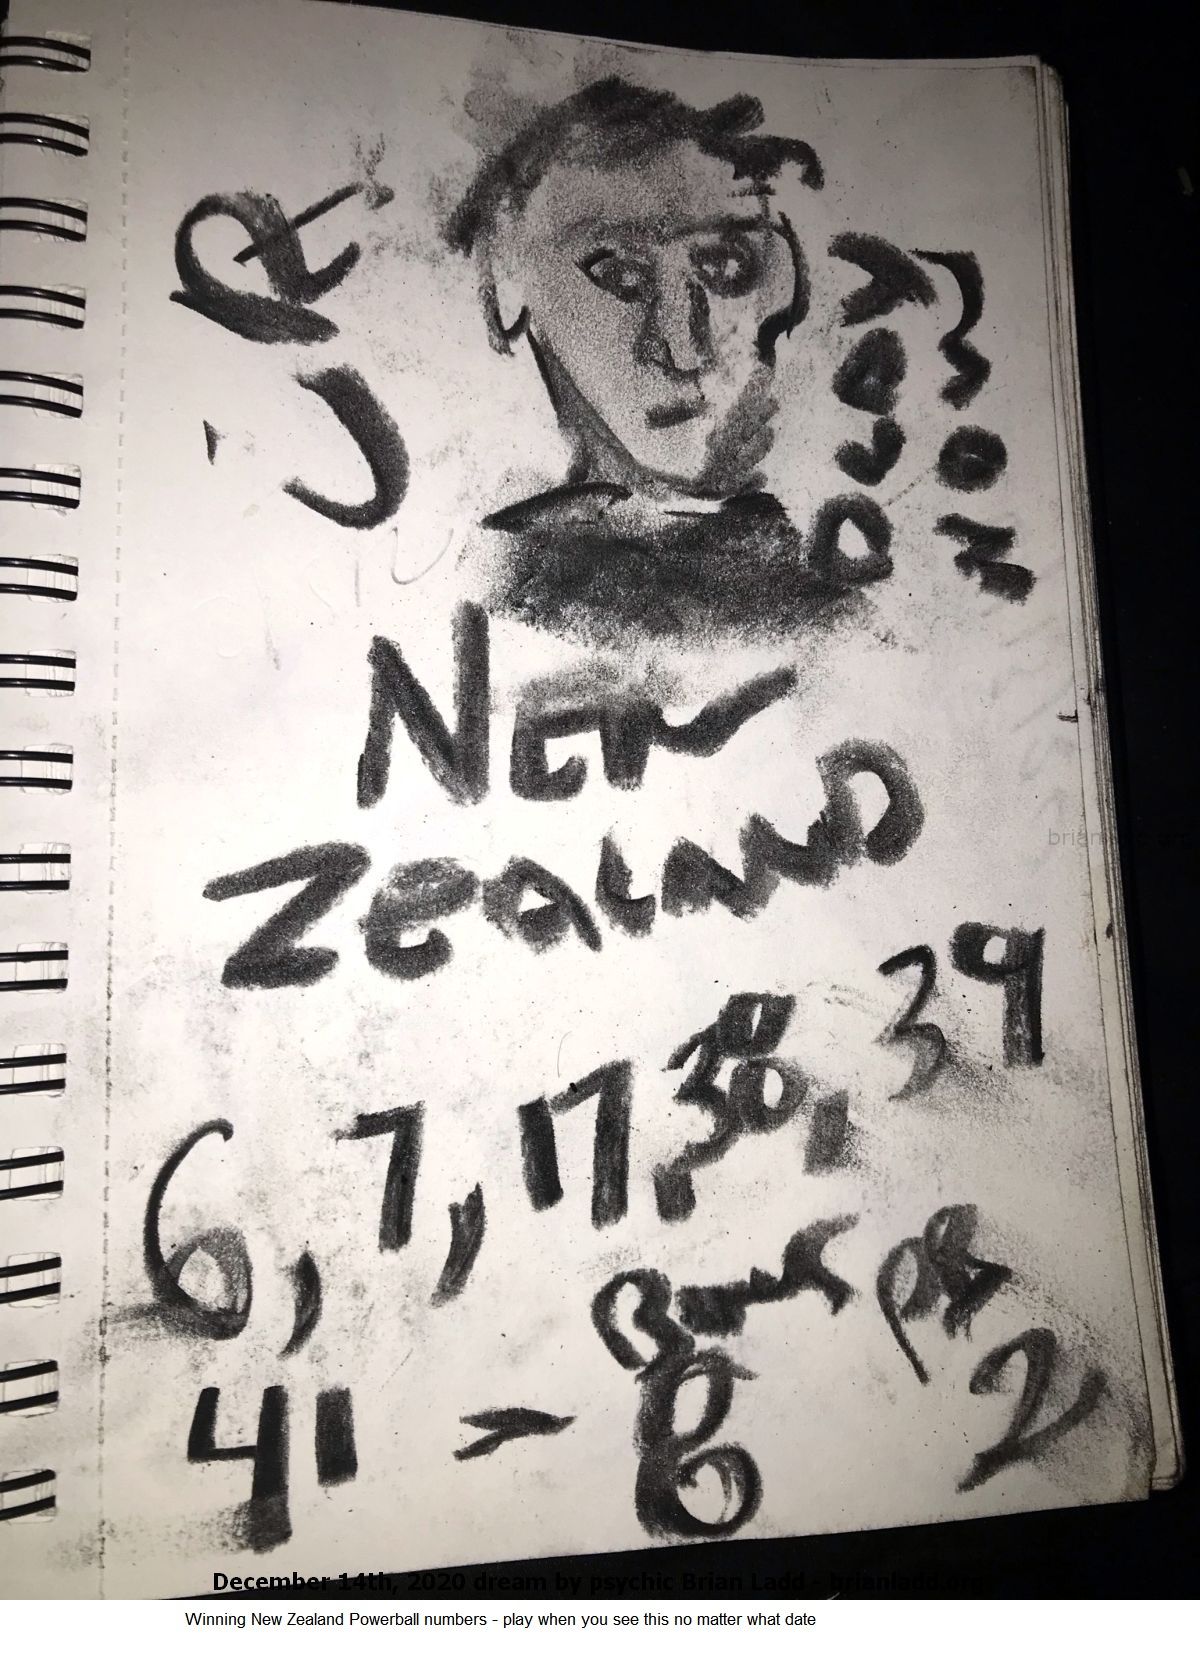 14175 14 December 2020 1 - Winning New Zealand Powerball Numbers - Play When You See This No Matter What Date....
Winning New Zealand Powerball Numbers - Play When You See This No Matter What Date.
